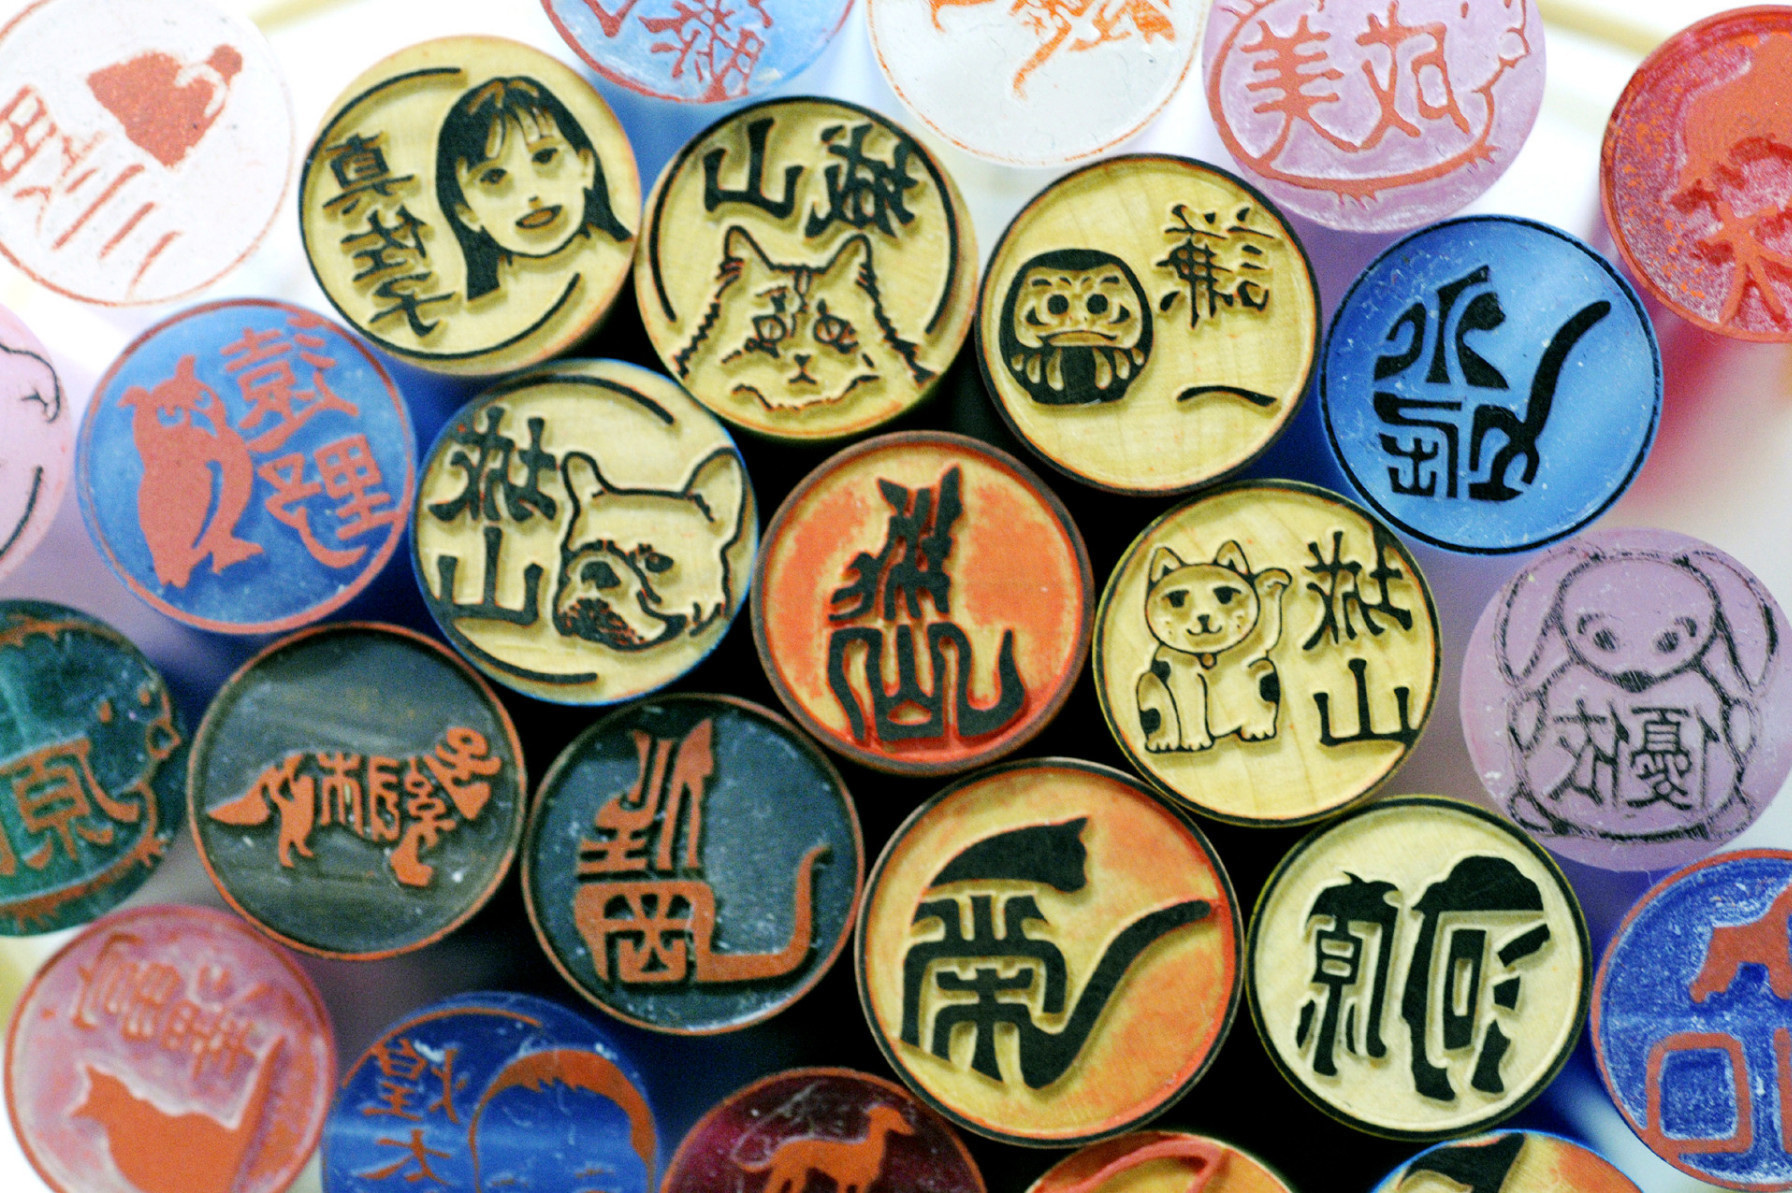 Cheeky chops: Hanko run the gamut from light-hearted novelty seals like these to the Privy Seal of Japan, which is wielded by the Emperor and hewn from pure gold, and the Great Seal of Japan, which is affixed to treaties, state documents and the like. | KYODO